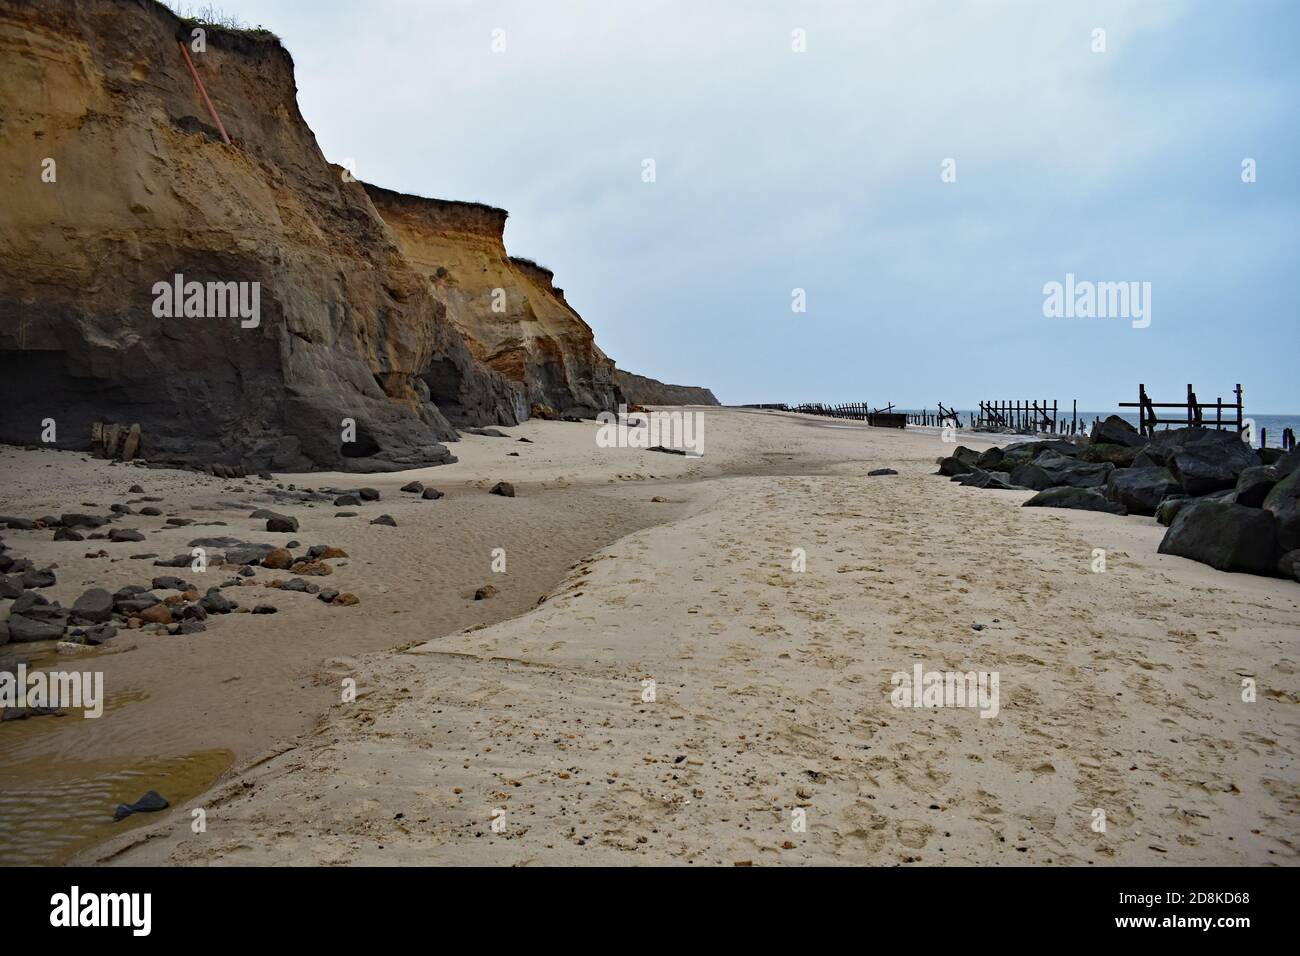 The cliffs at Happisburgh Beach displaying costal erosion, Norfolk, UK. The old wooden sea defences are visible along the edge of the beach. Stock Photo